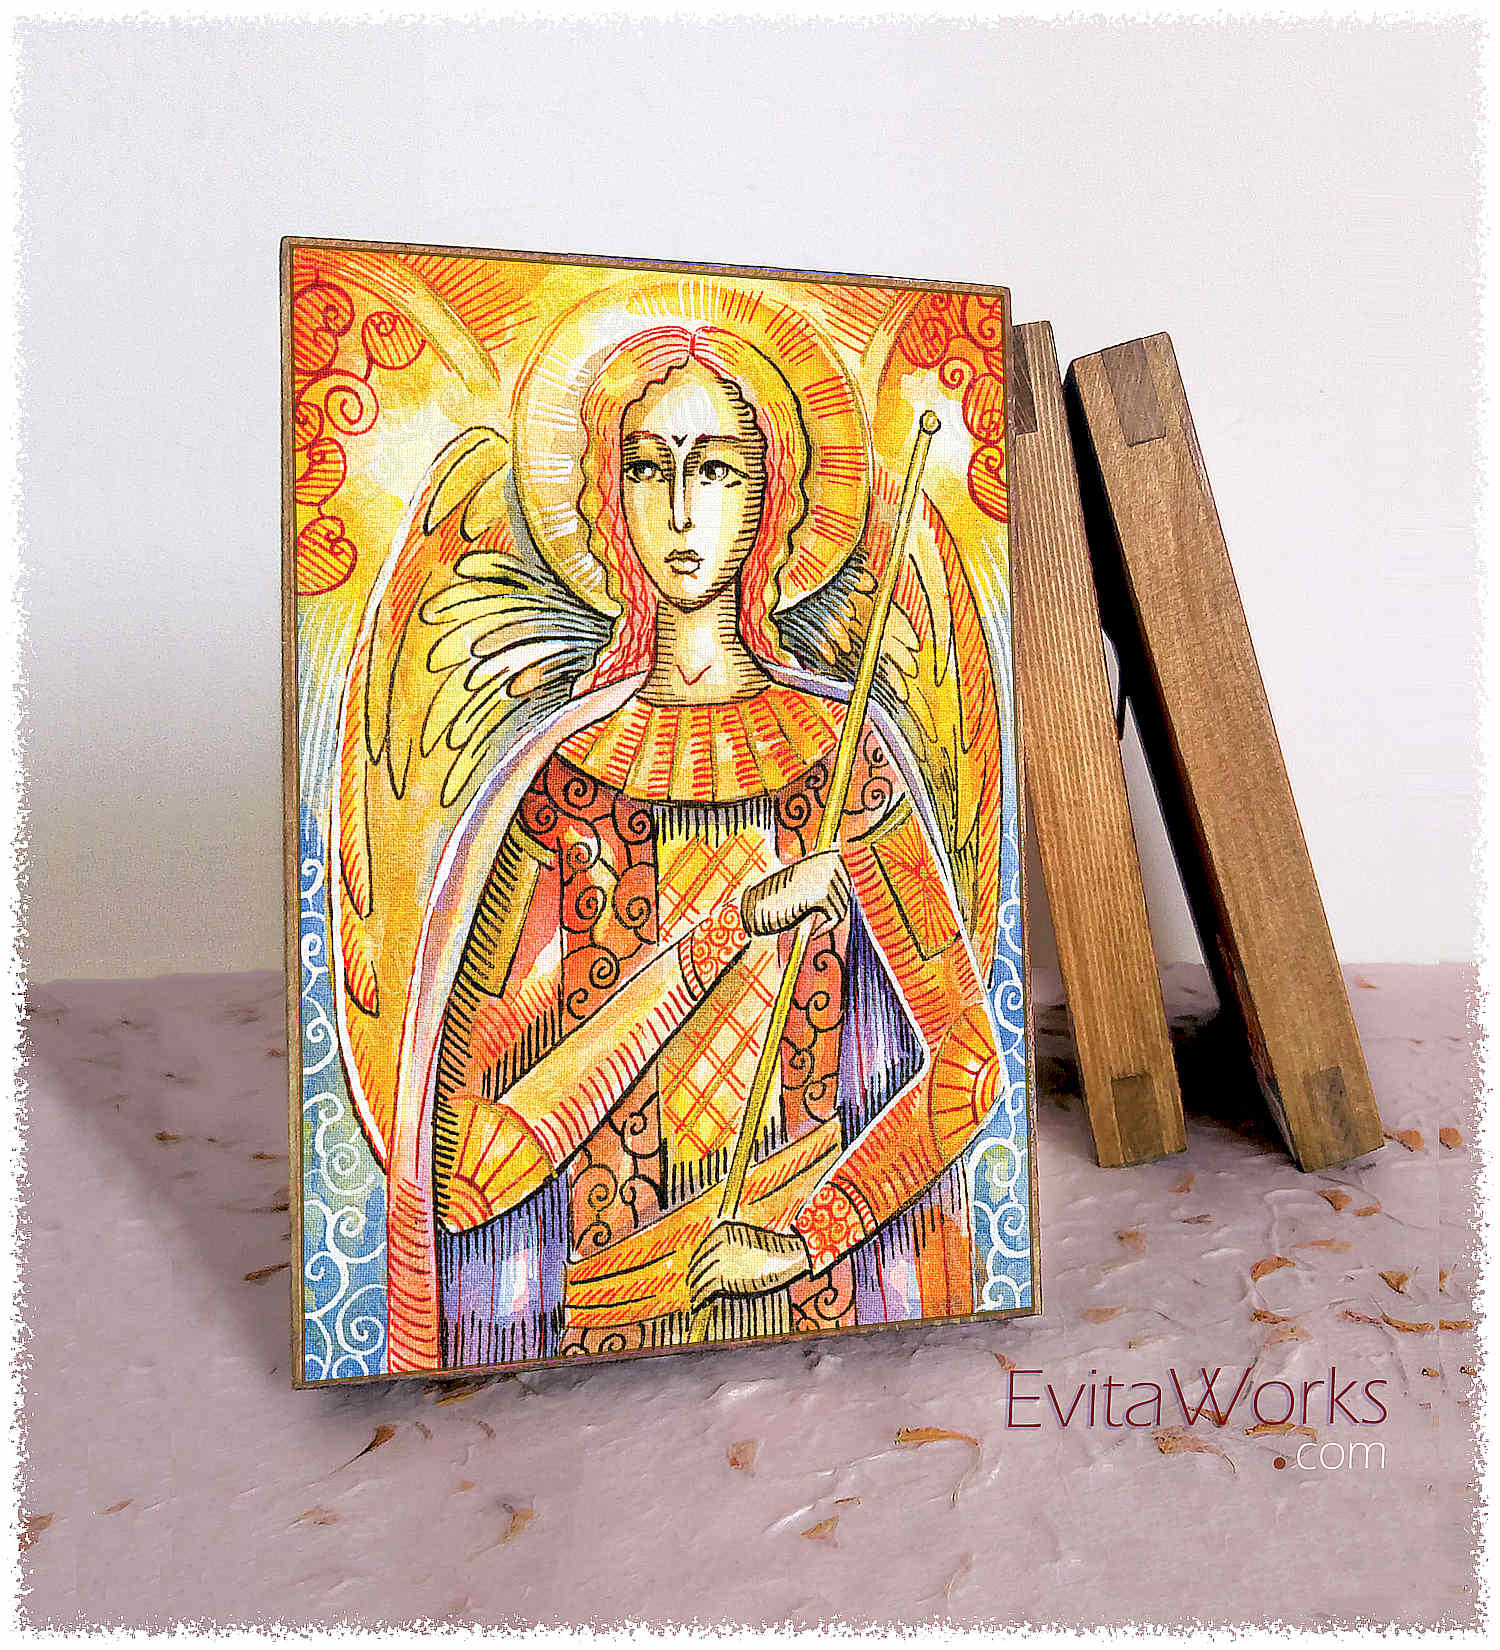 Hit to learn about "Angel 32, Christian art" on woodblocks